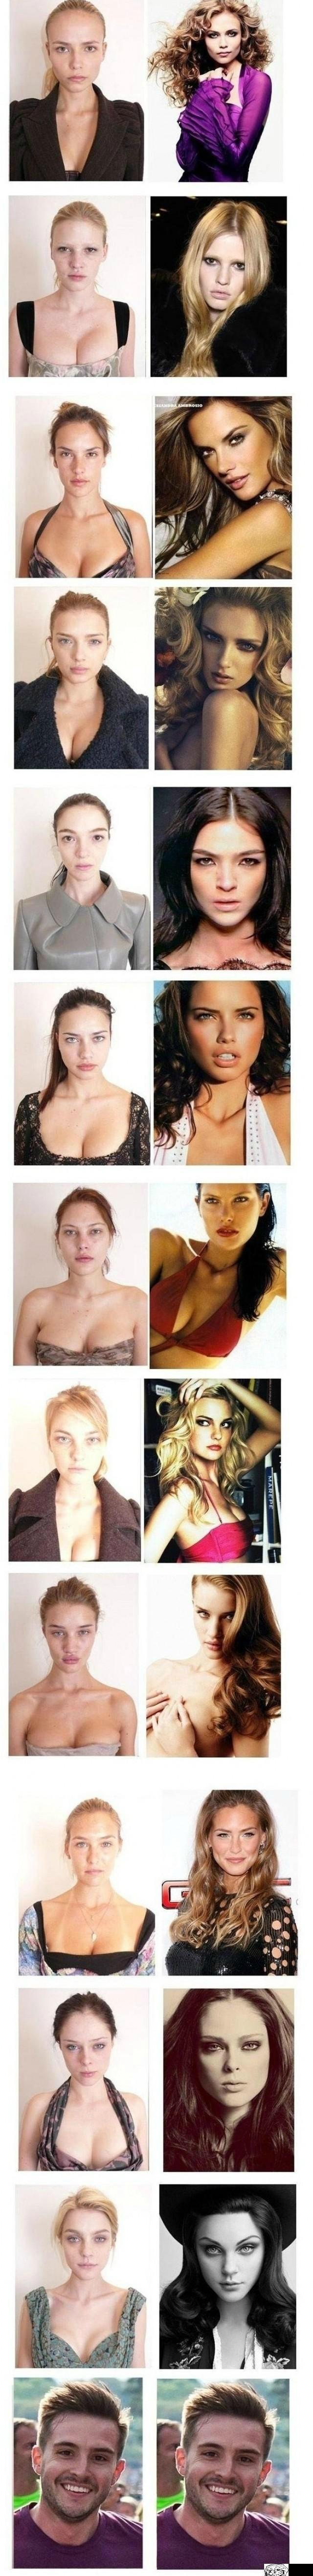 Supermodels without make-up... wait for it